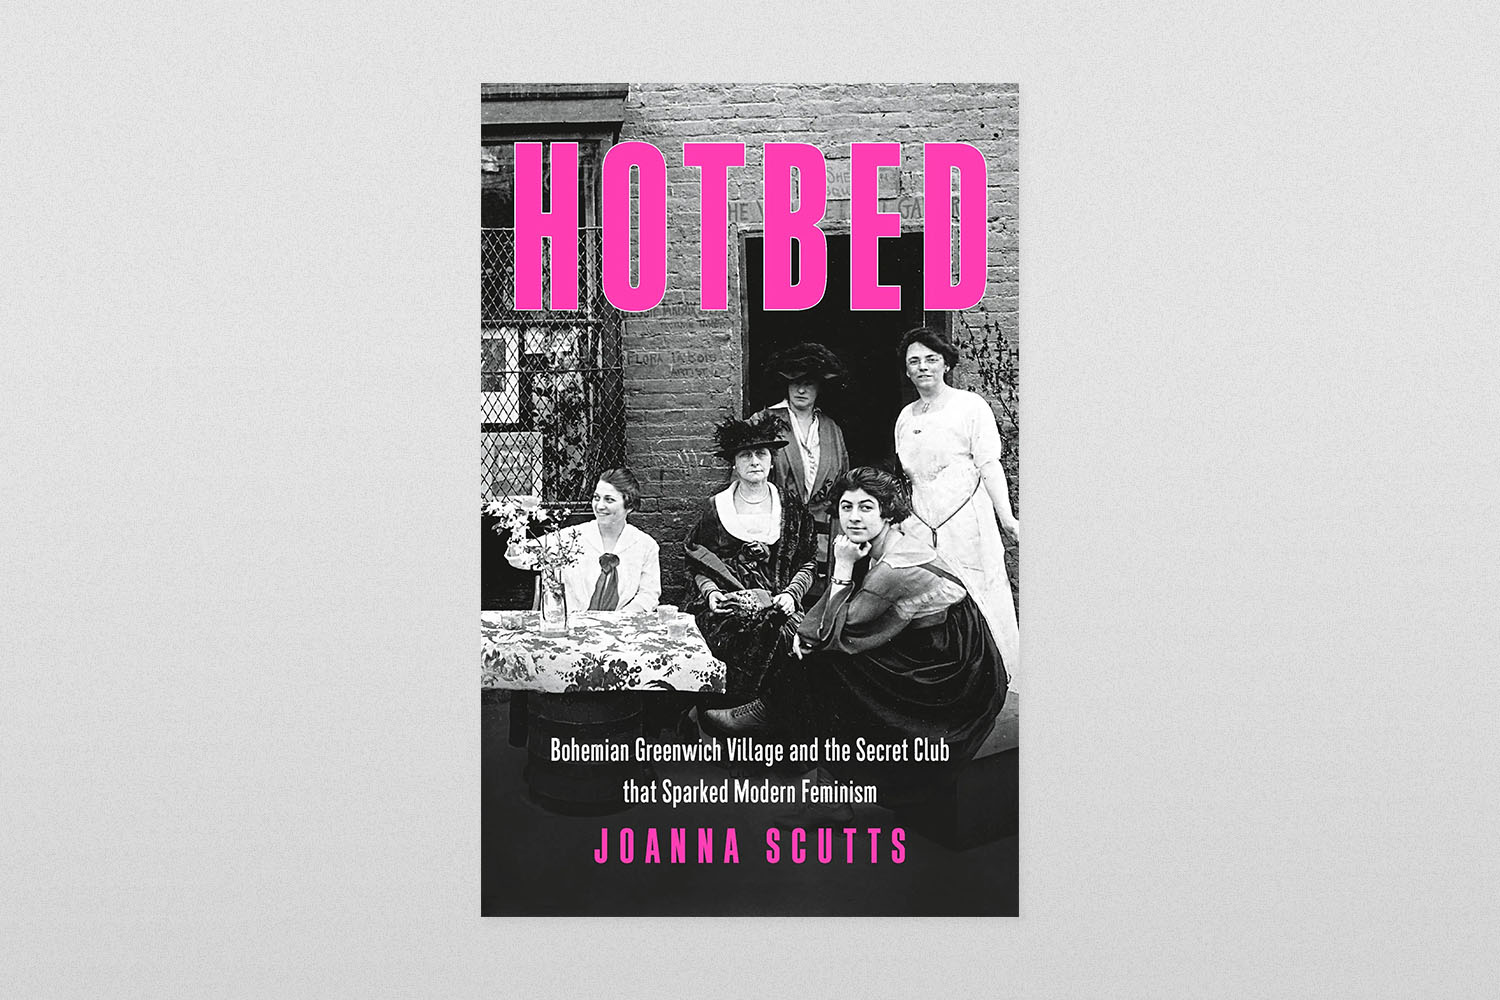 Hotbed- Bohemian Greenwich Village and the Secret Club That Sparked Modern Feminism Joanna Scutts